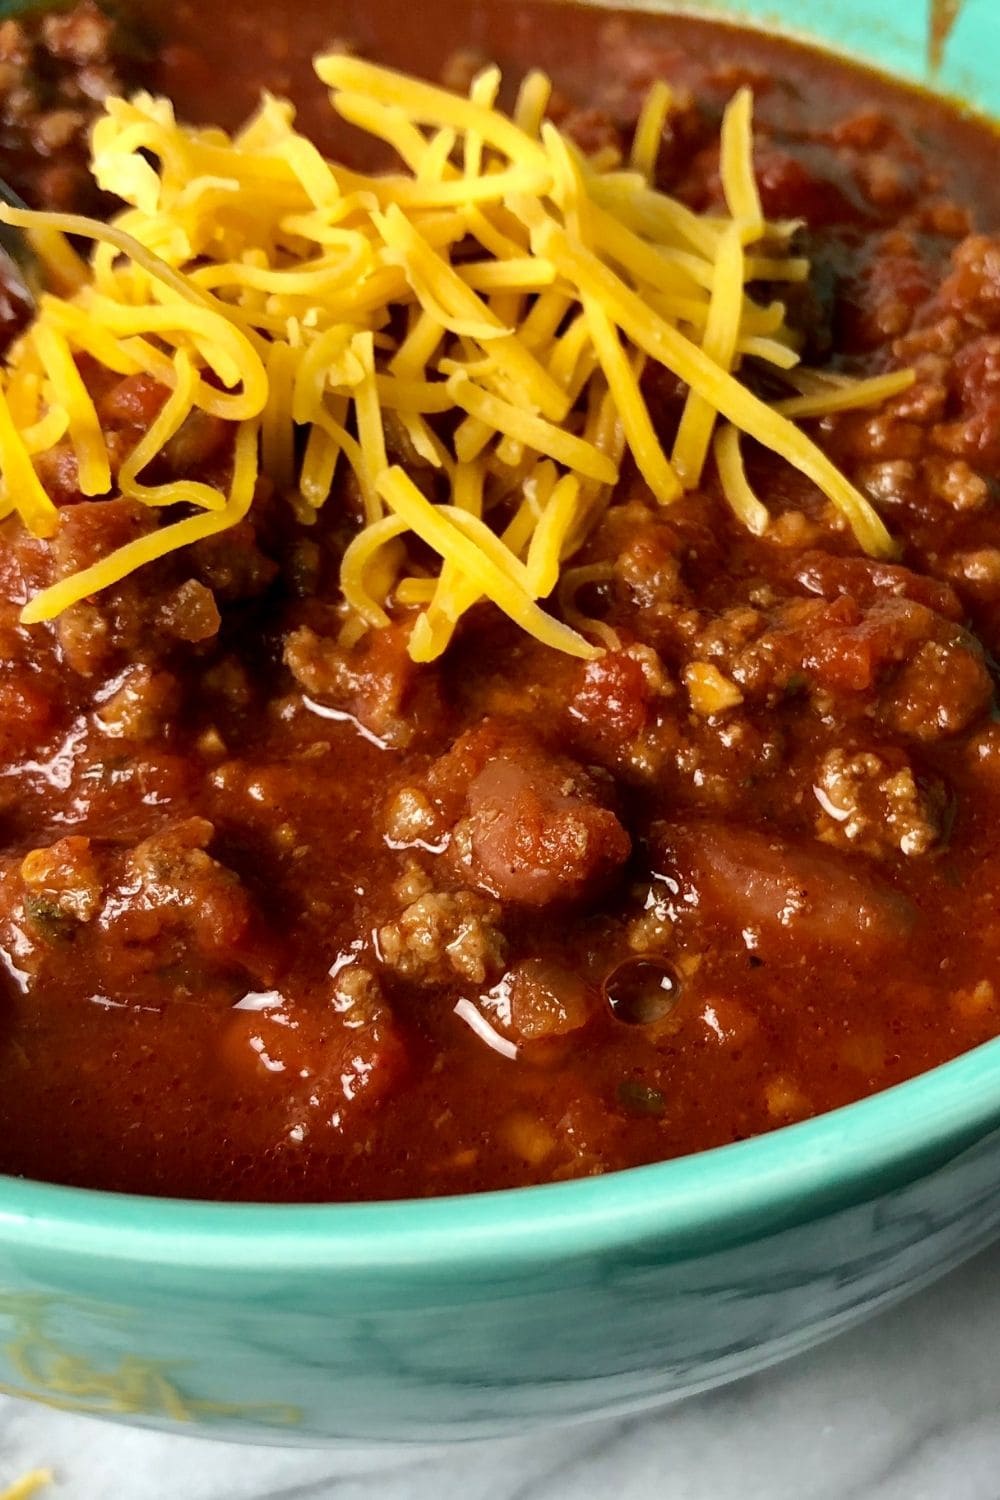 Chili Dip with Ground Beef and Cheese in a Bowl